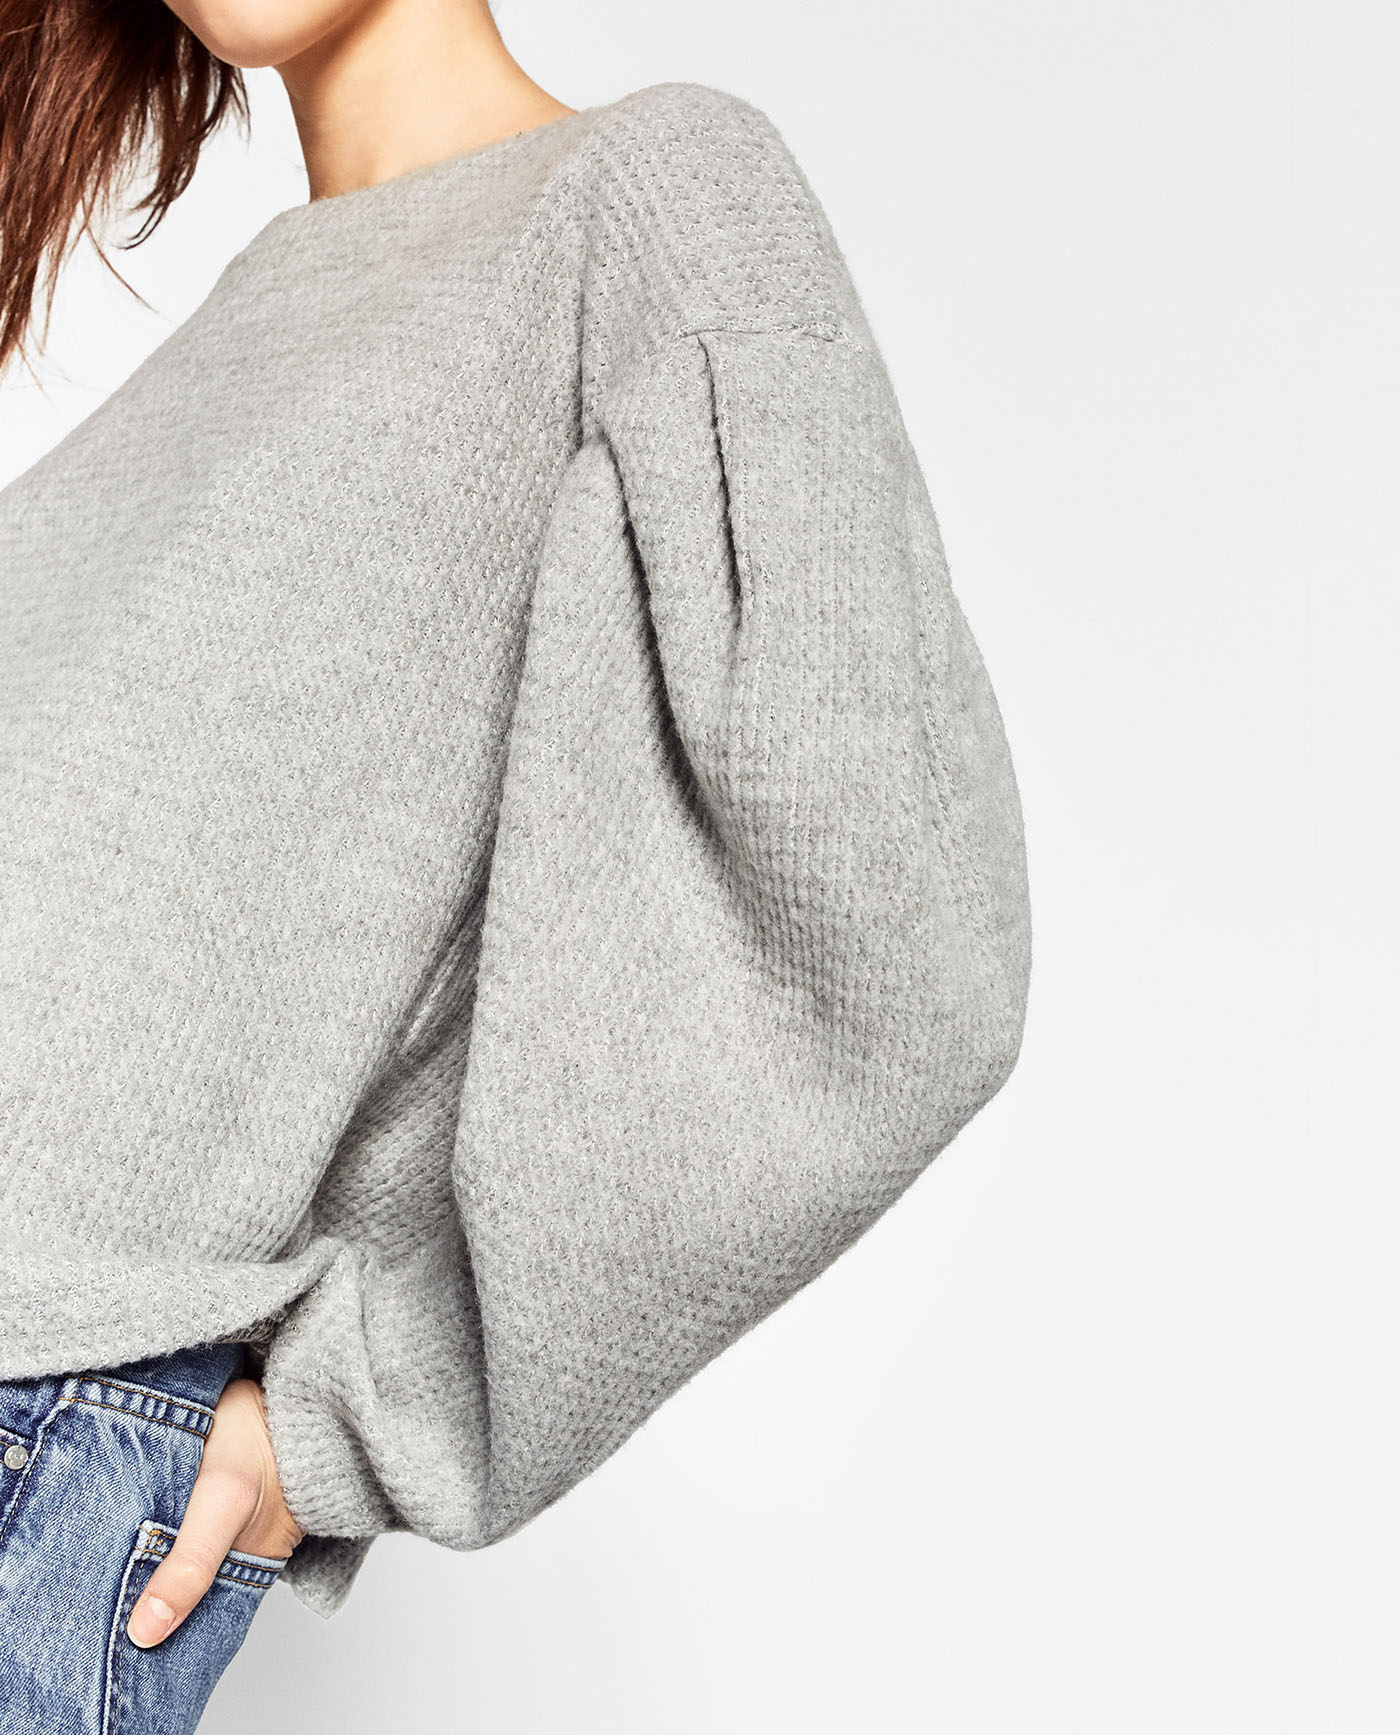 sweater grey soft touch